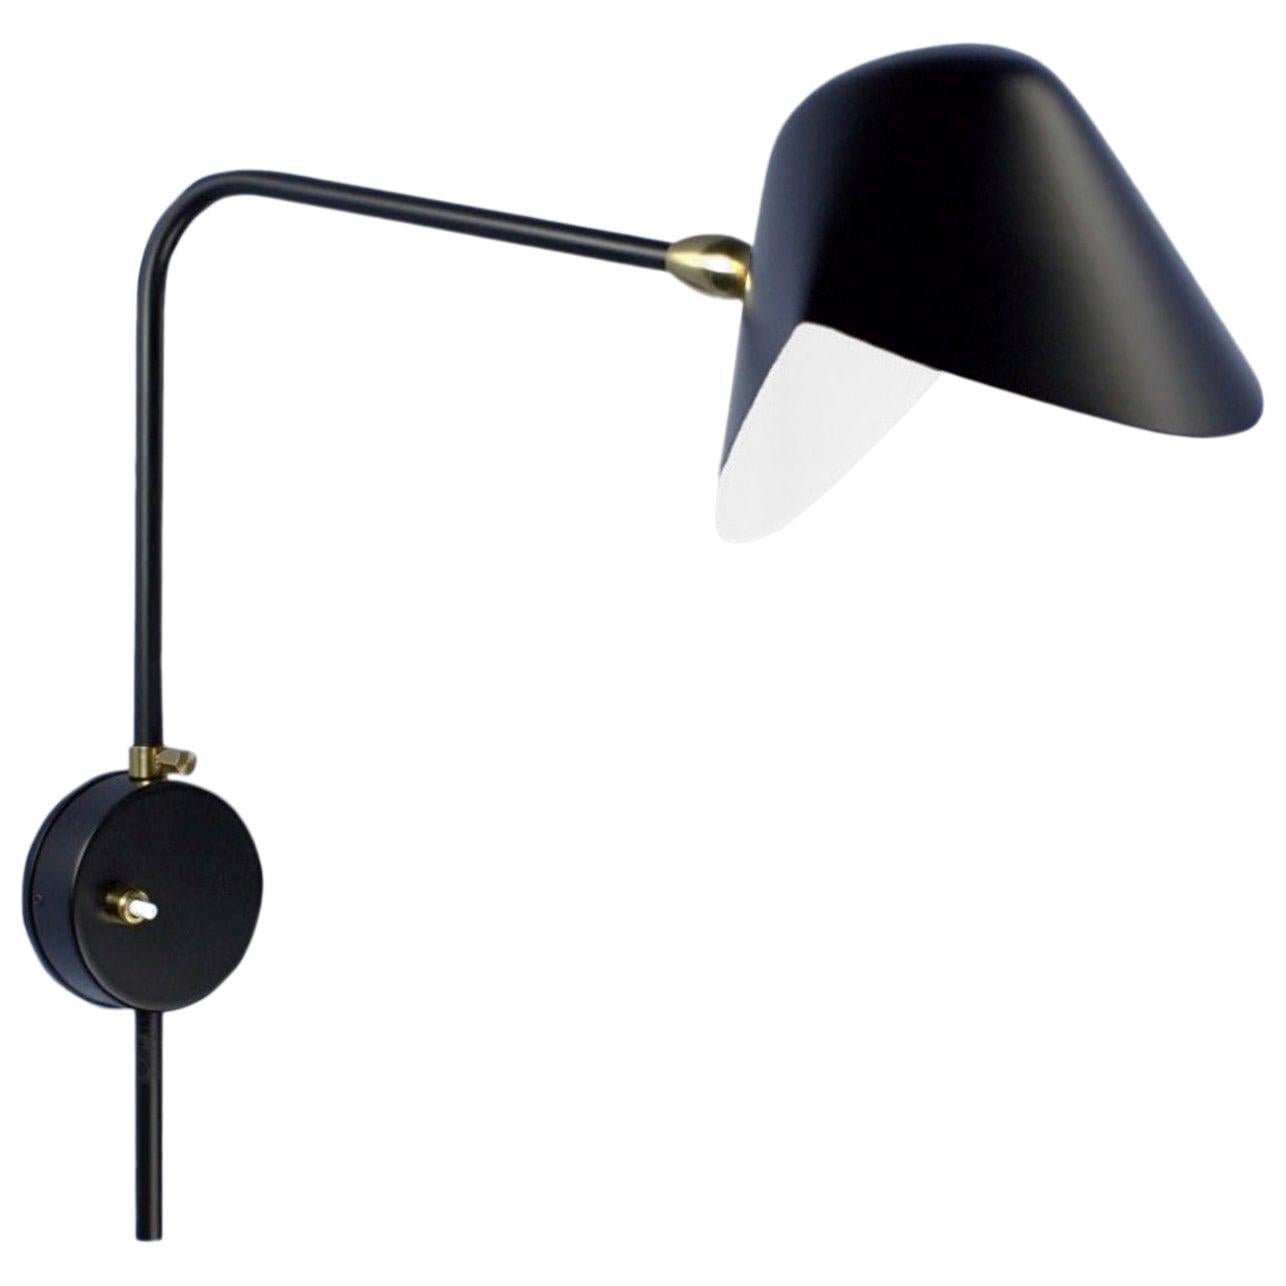 Serge Mouille Mid-Century Modern Black Anthony Wall Lamp Whit Round Fixation Box For Sale